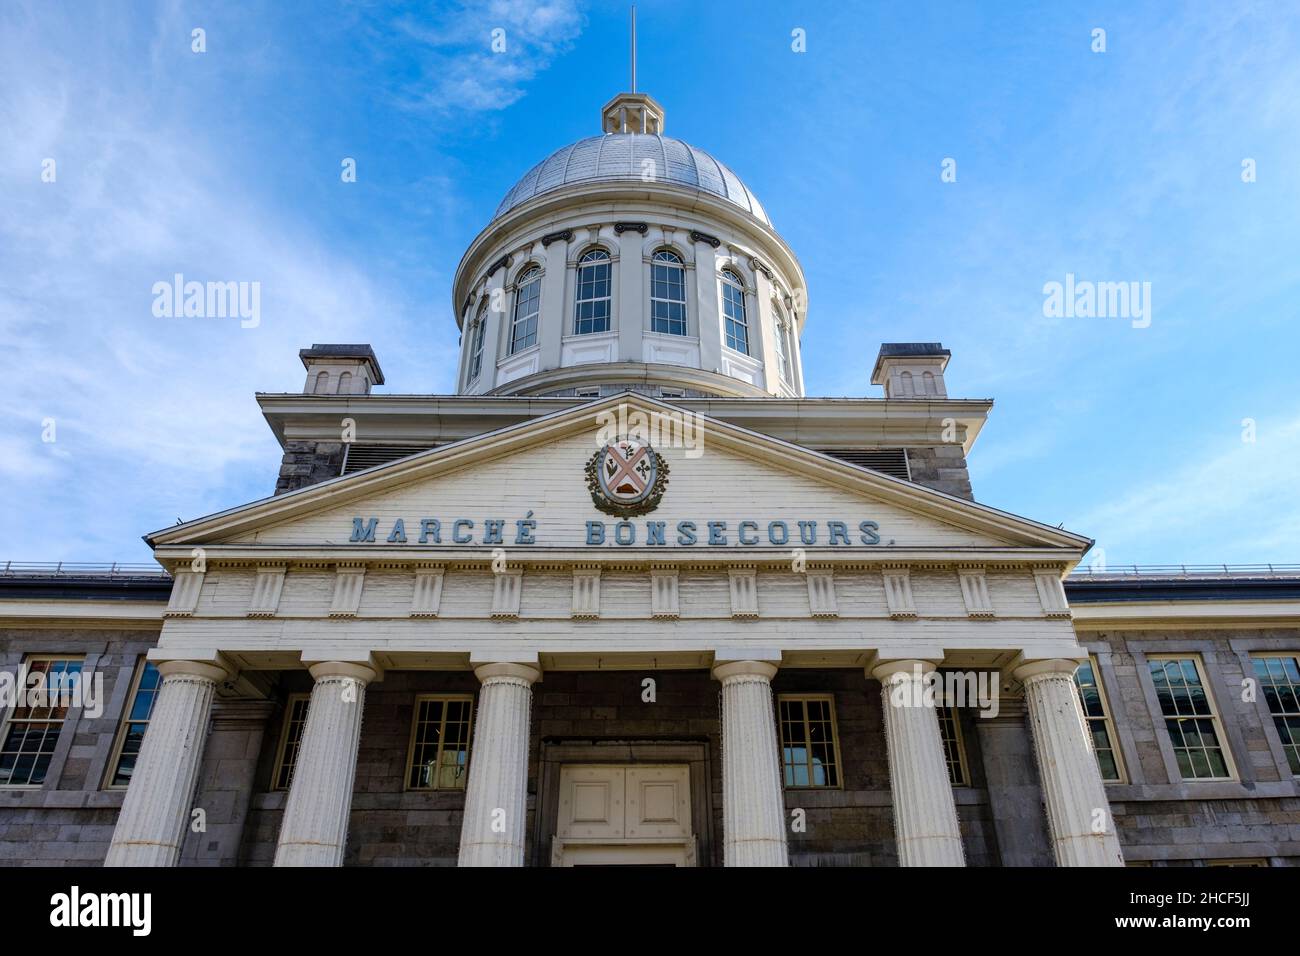 Facade of Marché Bonsecours, Bonsecours Market, National Historic Site of Canada, Rue Saint-Paul E, Vieux Montreal, Quebec, Canada Stock Photo